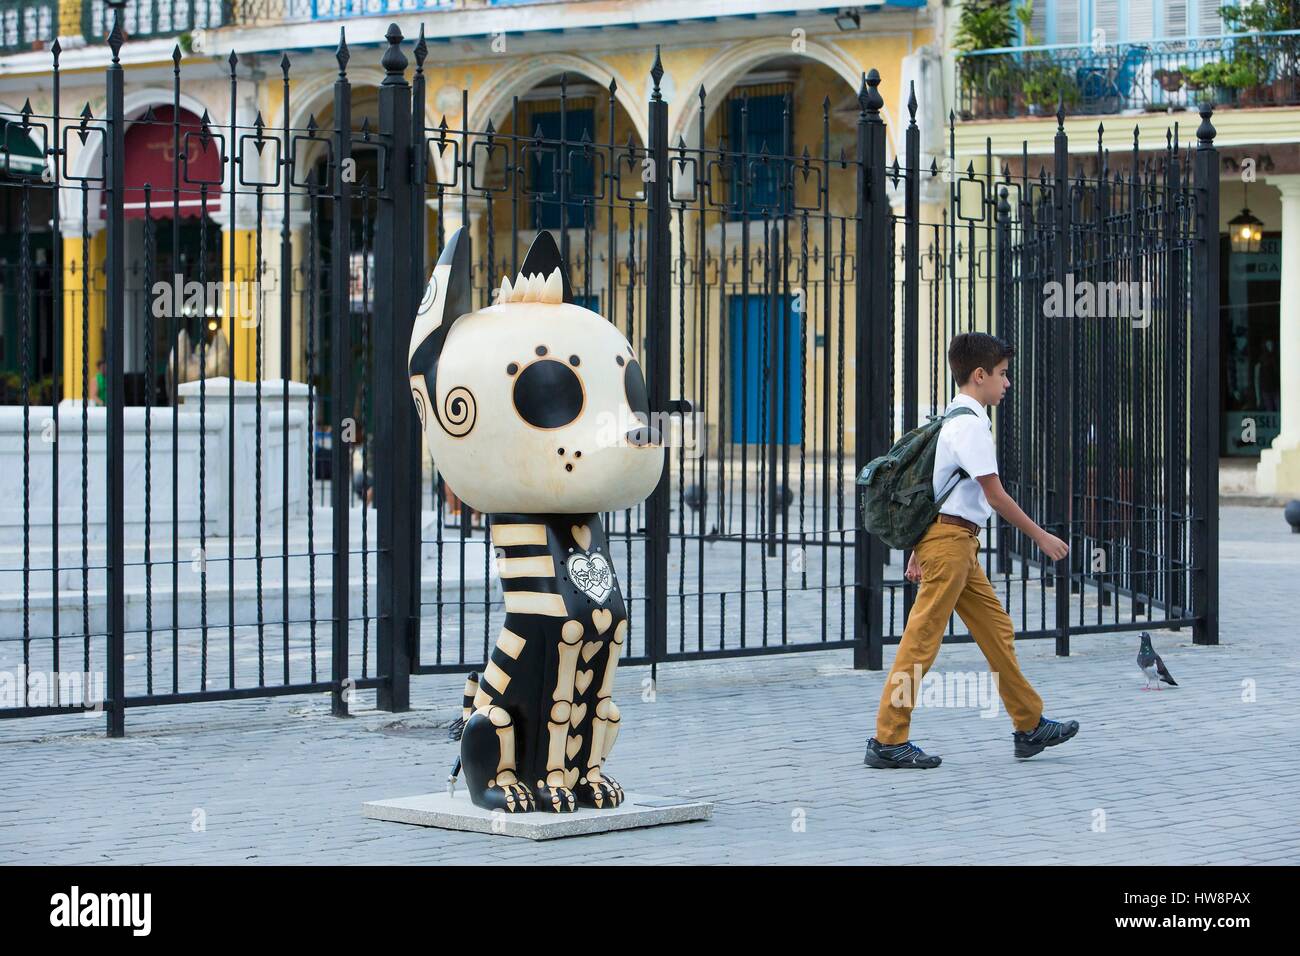 Cuba, Ciudad de la Habana province, Havana, Habana Vieja district listed as World Heritage by UNESCO, art exposition Travesias de Xico by Mexican artists Cristina Pineda and Ricardo Covalin. Xico is a charismatic dog known as Xoloitzincuitle and is the symbol of friendship and cultural exchanges in between people. Location Plaza Vieja (Old Square) Stock Photo